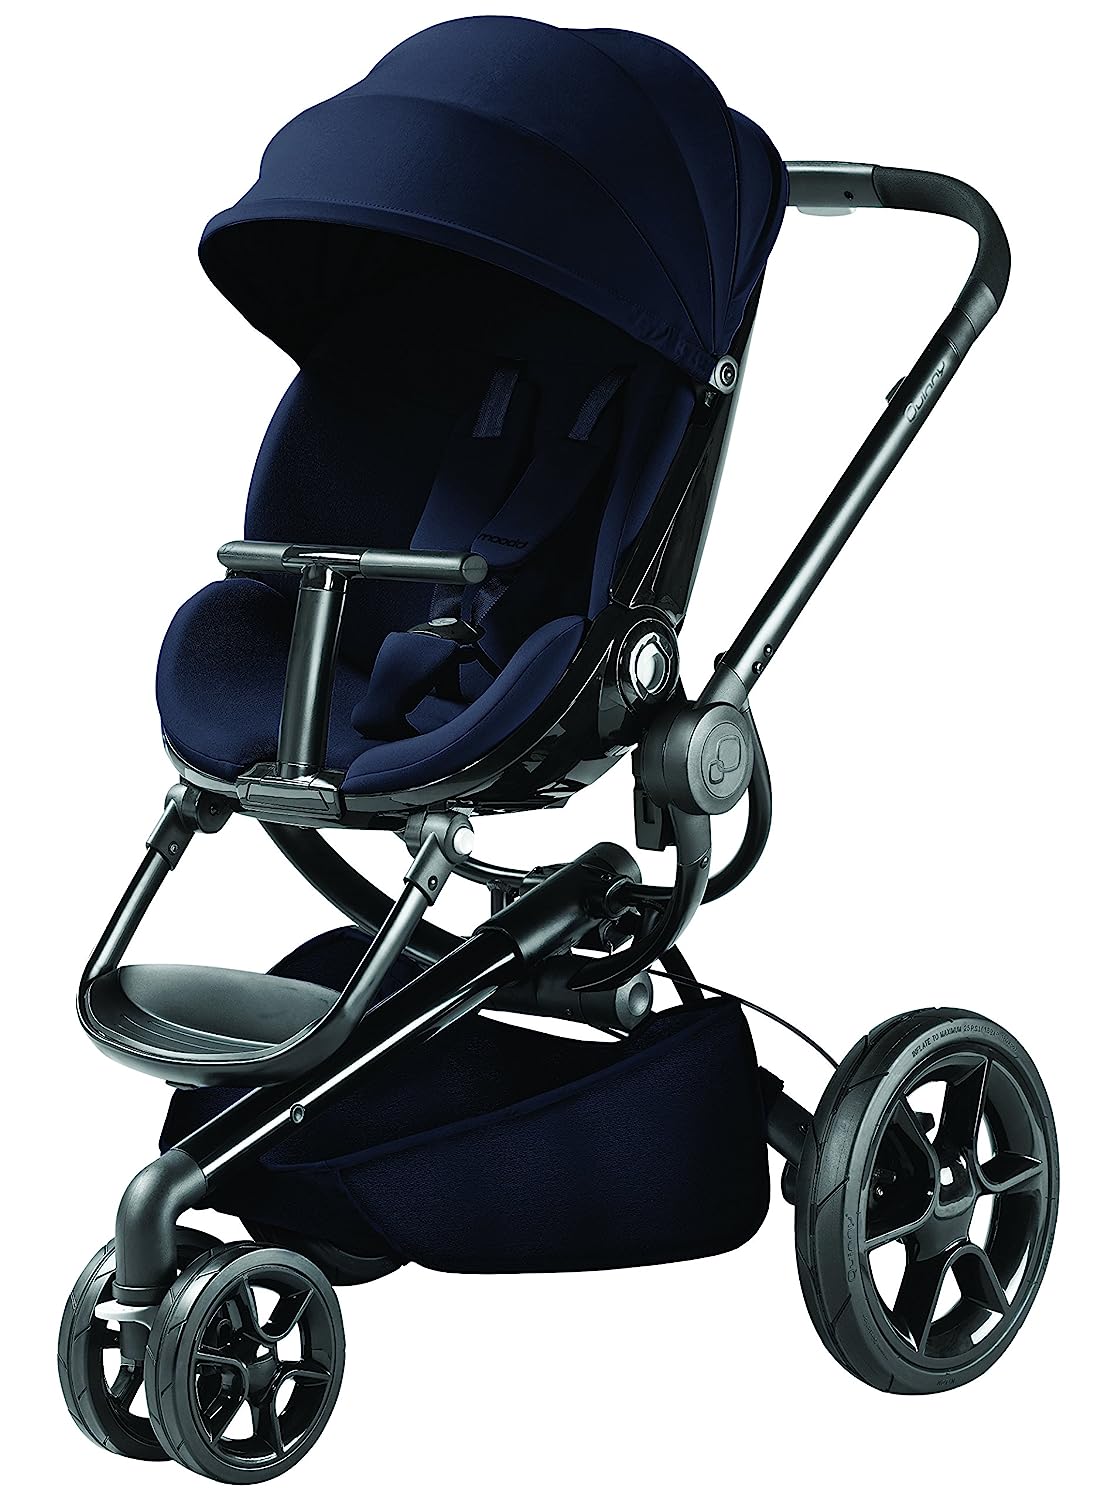 Quinny Moodd Pushchair with Automatic Pop Up Function - Reclining Position in Both Directions - Modern design from birth to approx. 3–5 years. without baby bath